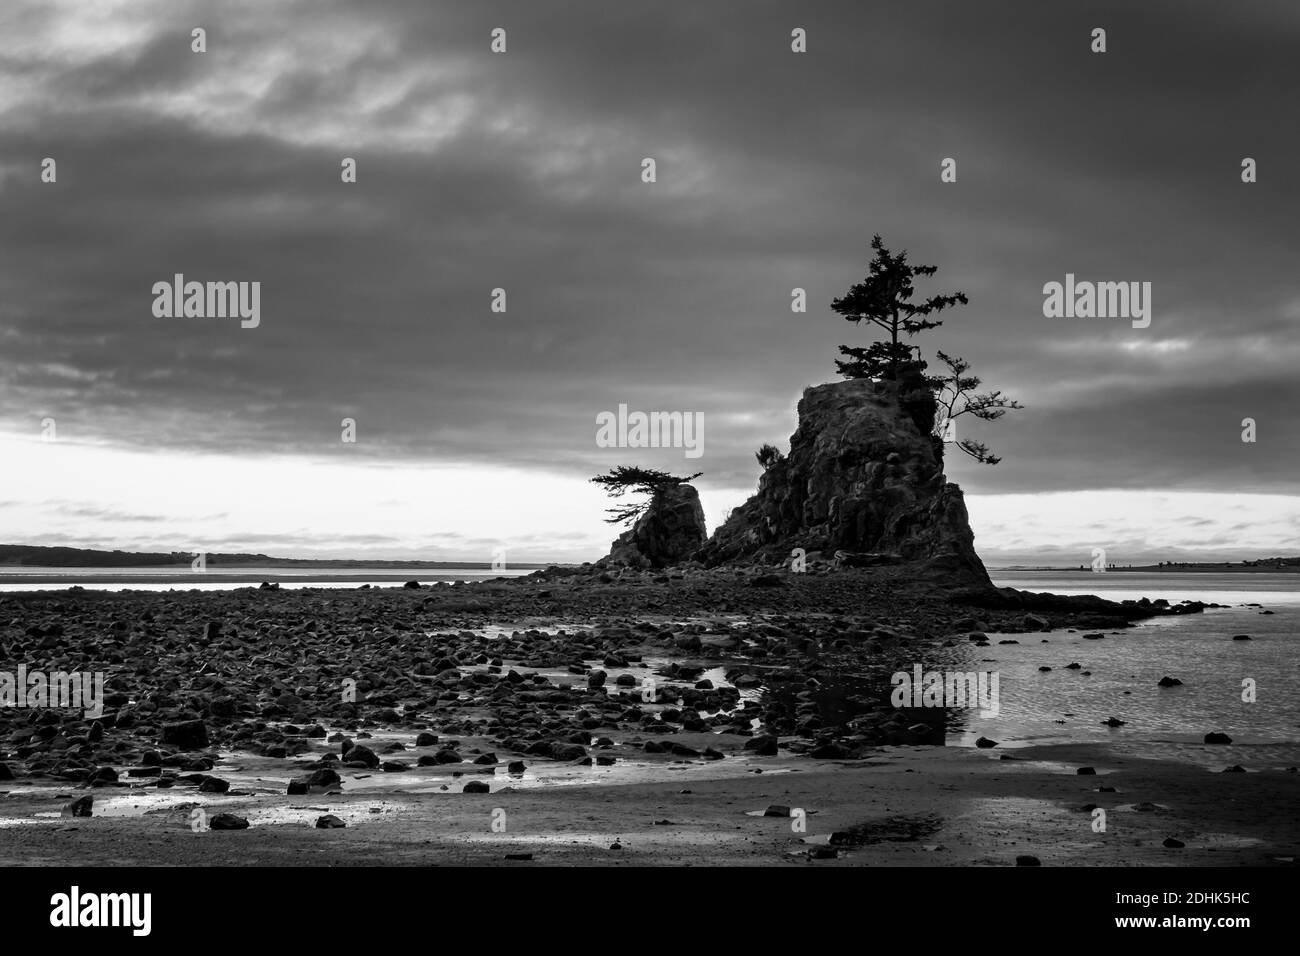 A greyscale shot of the trees on the beach on a cloudy day Stock Photo